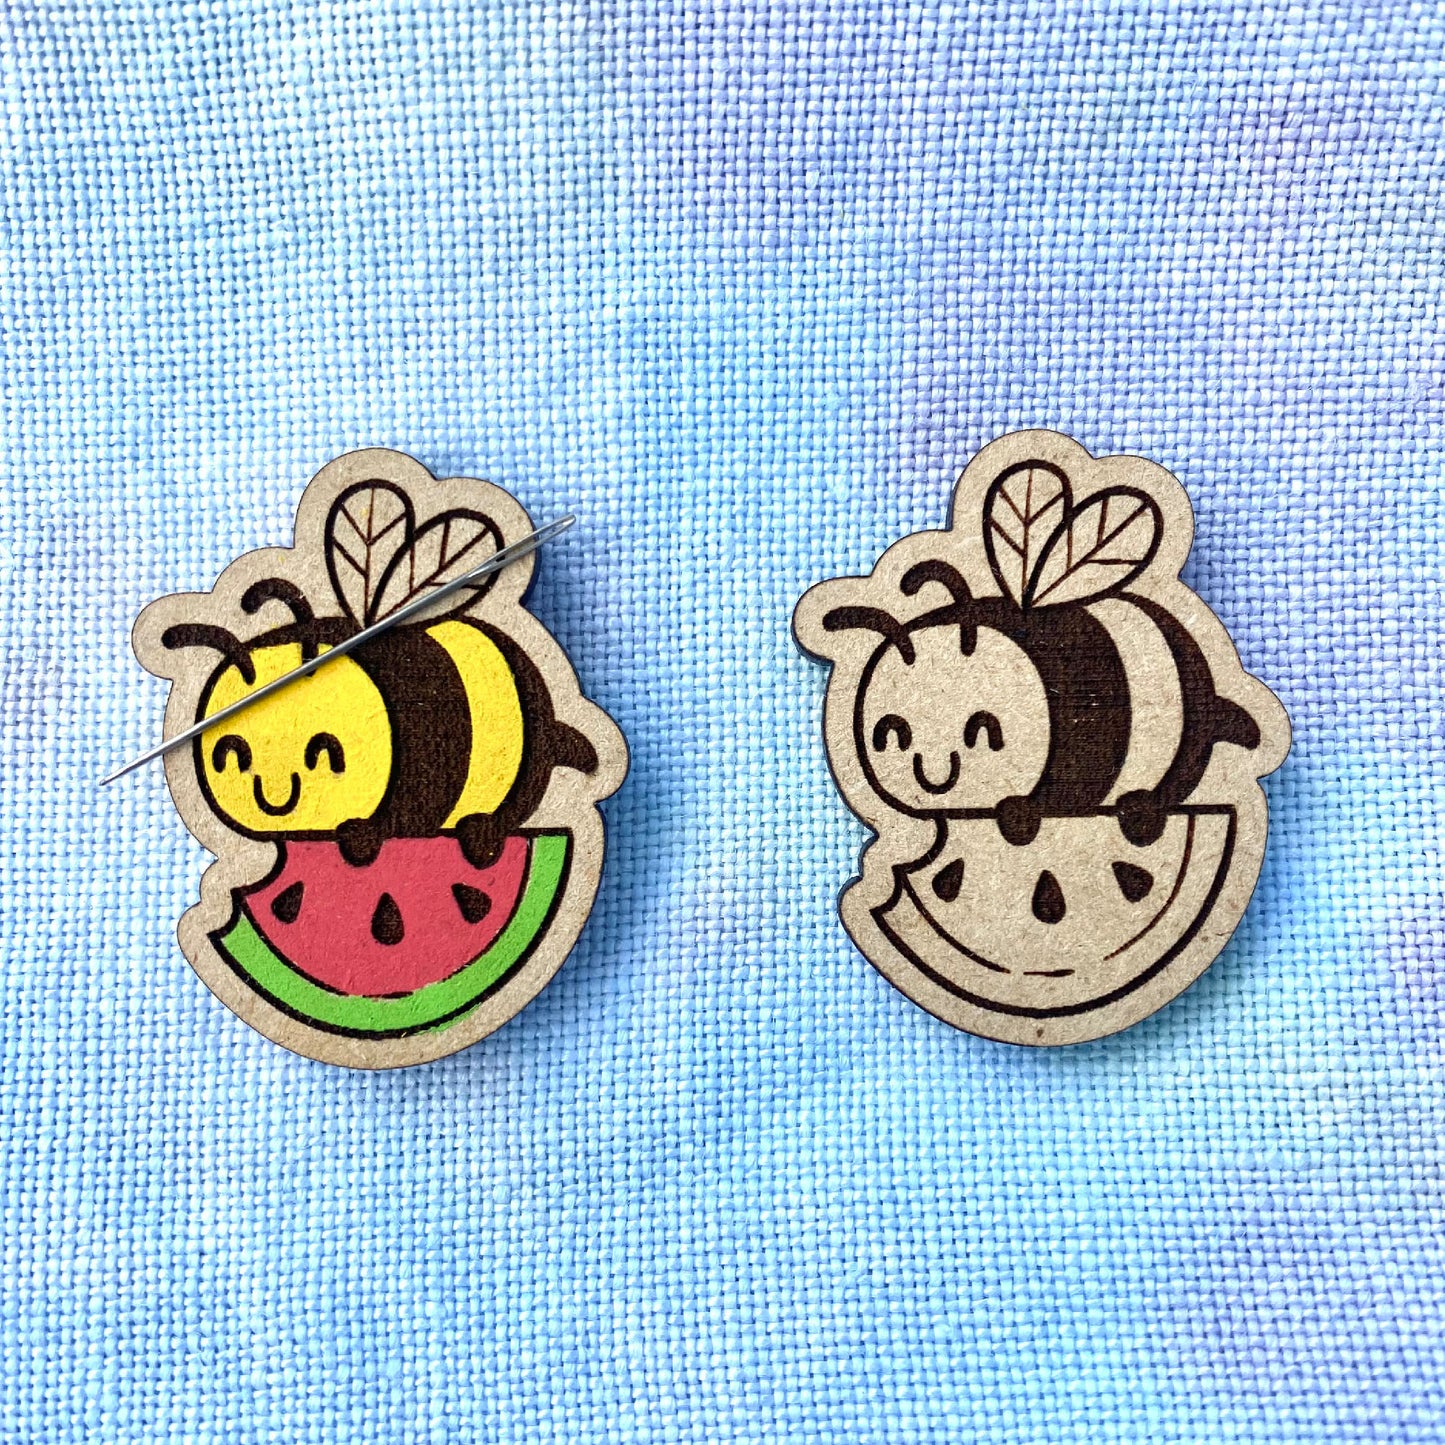 Cute Summer Watermelon with Bee Needleminder